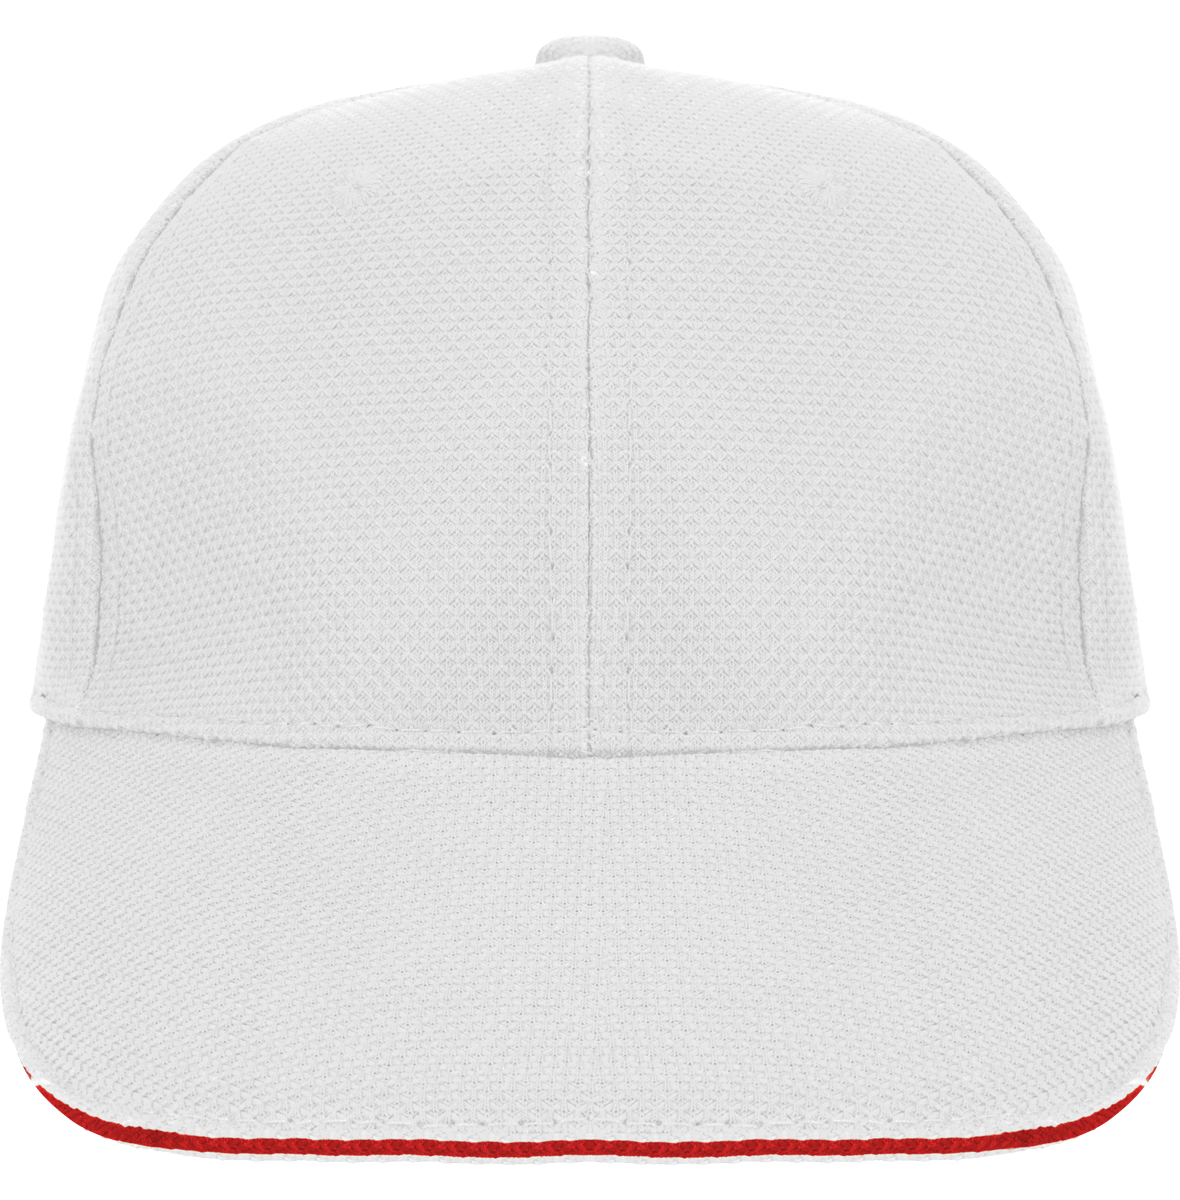 Casquette Sport Maille Piquée | 100% Polyester | Broderie  White / Red